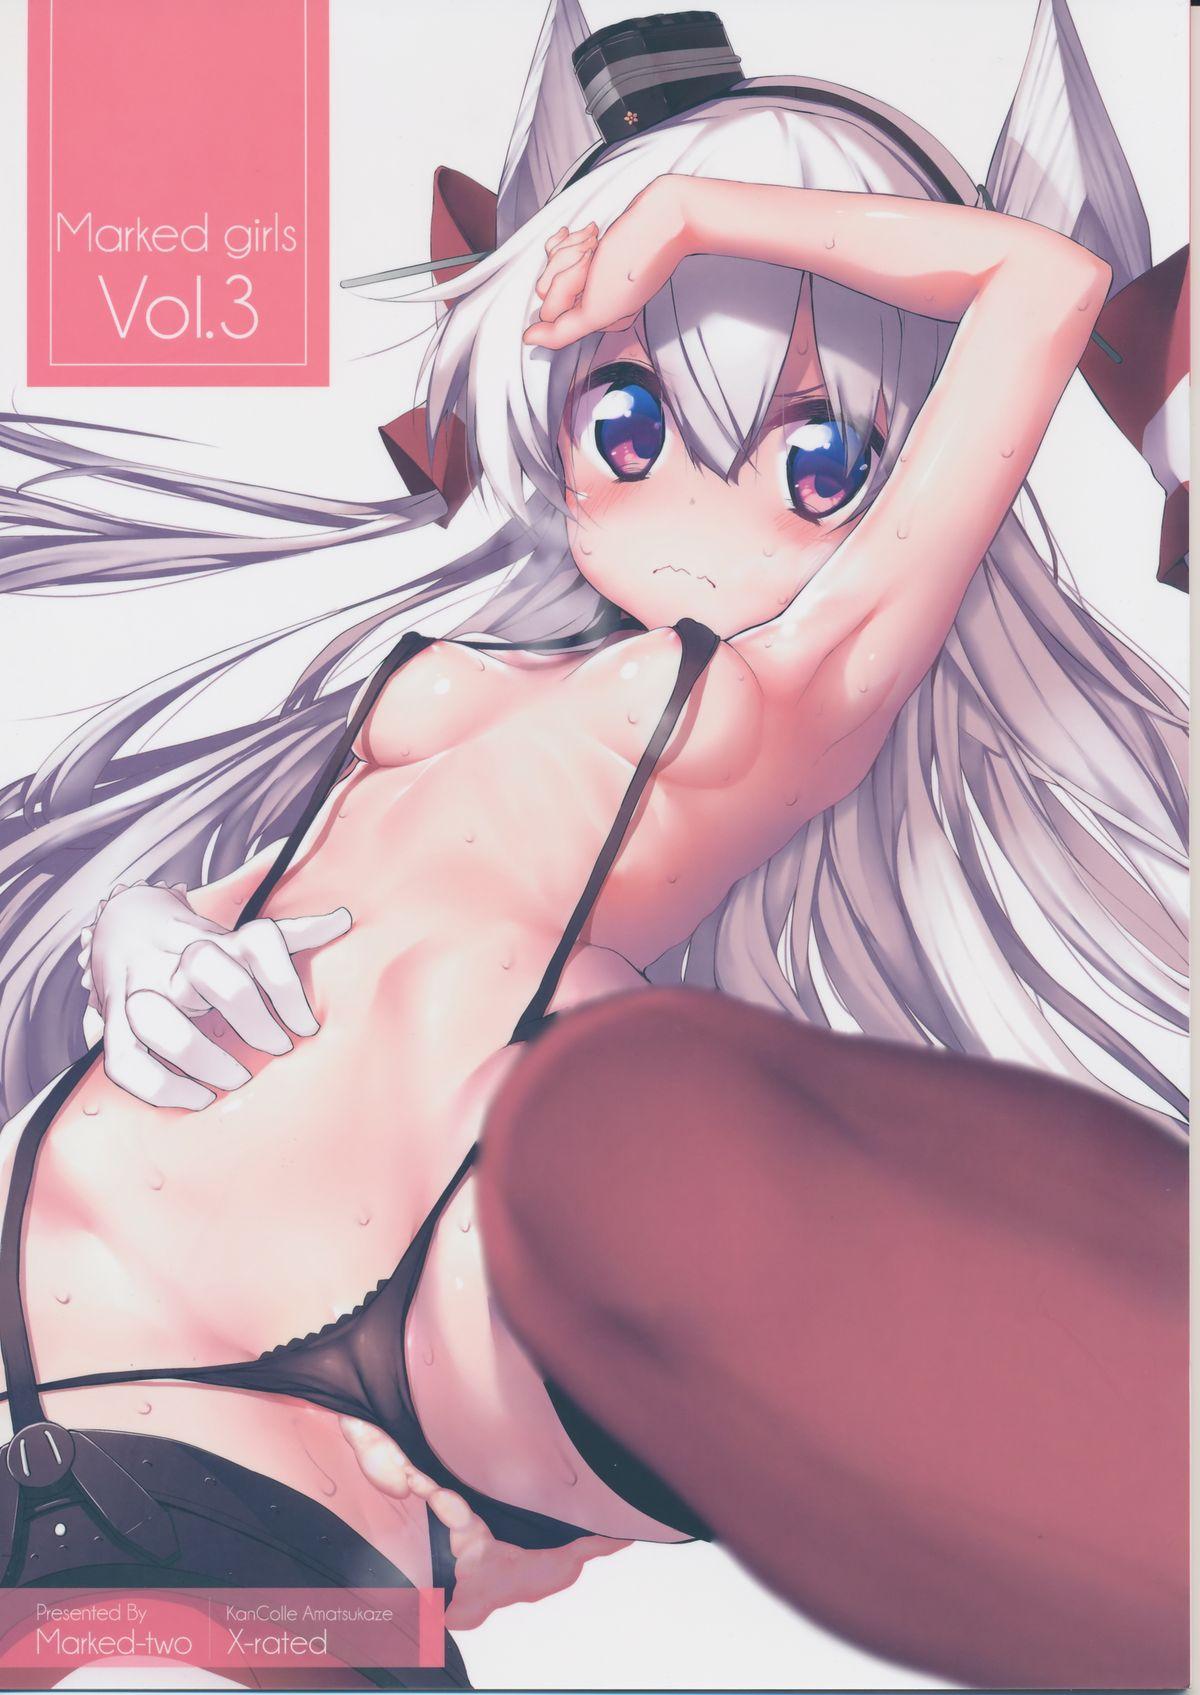 Whatsapp Marked-girls Vol. 3 - Kantai collection Culos - Picture 1